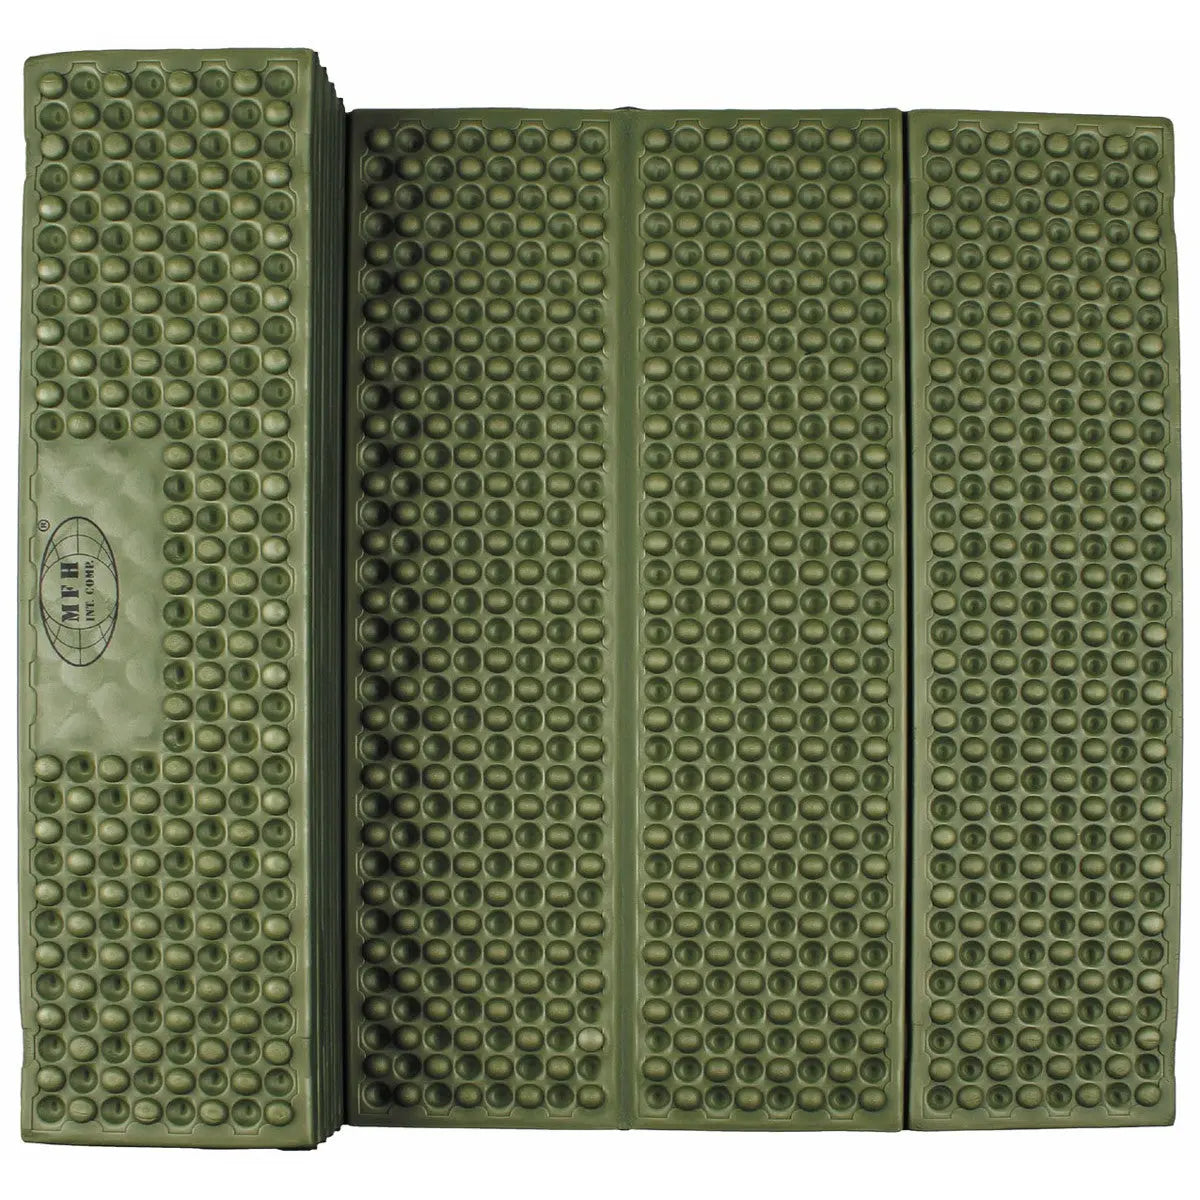 Thermal Pad, foldable, OD green NSO Gear